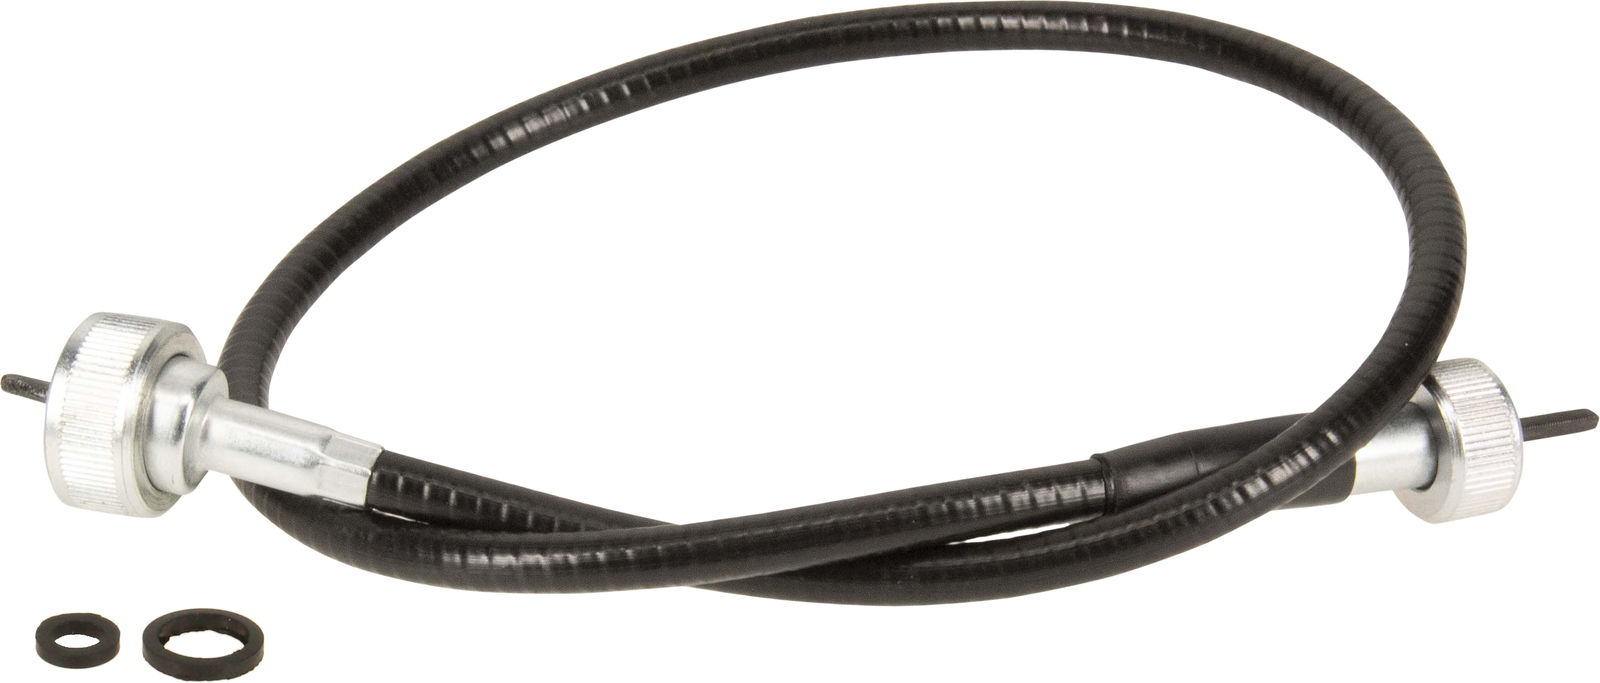 544198M91 NEW 56in Tachometer Cable for Massey Ferguson 265 285 85 275 88+